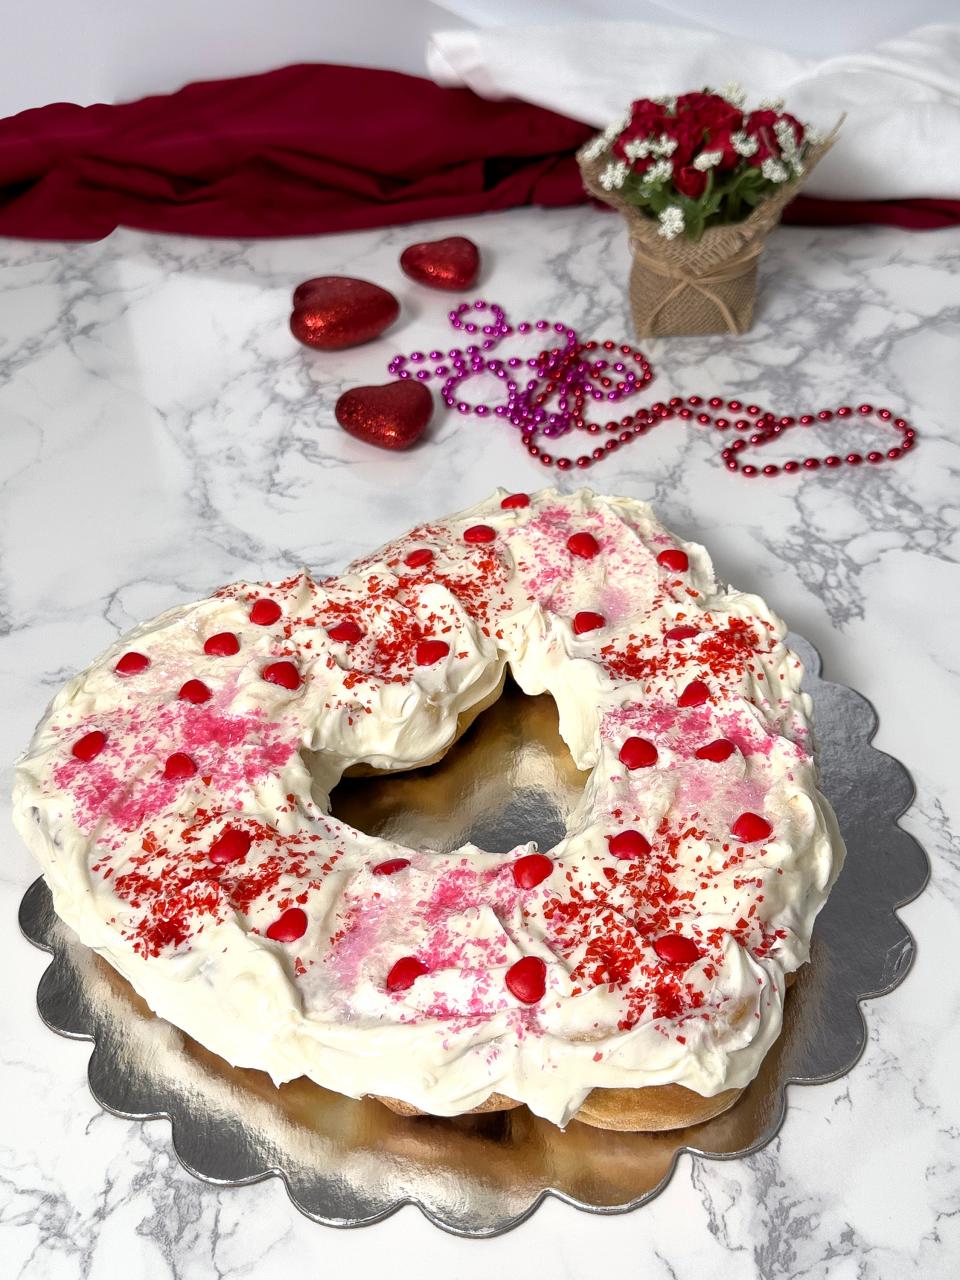 Sweetheart King Cakes forms traditional Mardi Gras king cake into a heart shape for a festive touch to Valentine’s Day sweets.